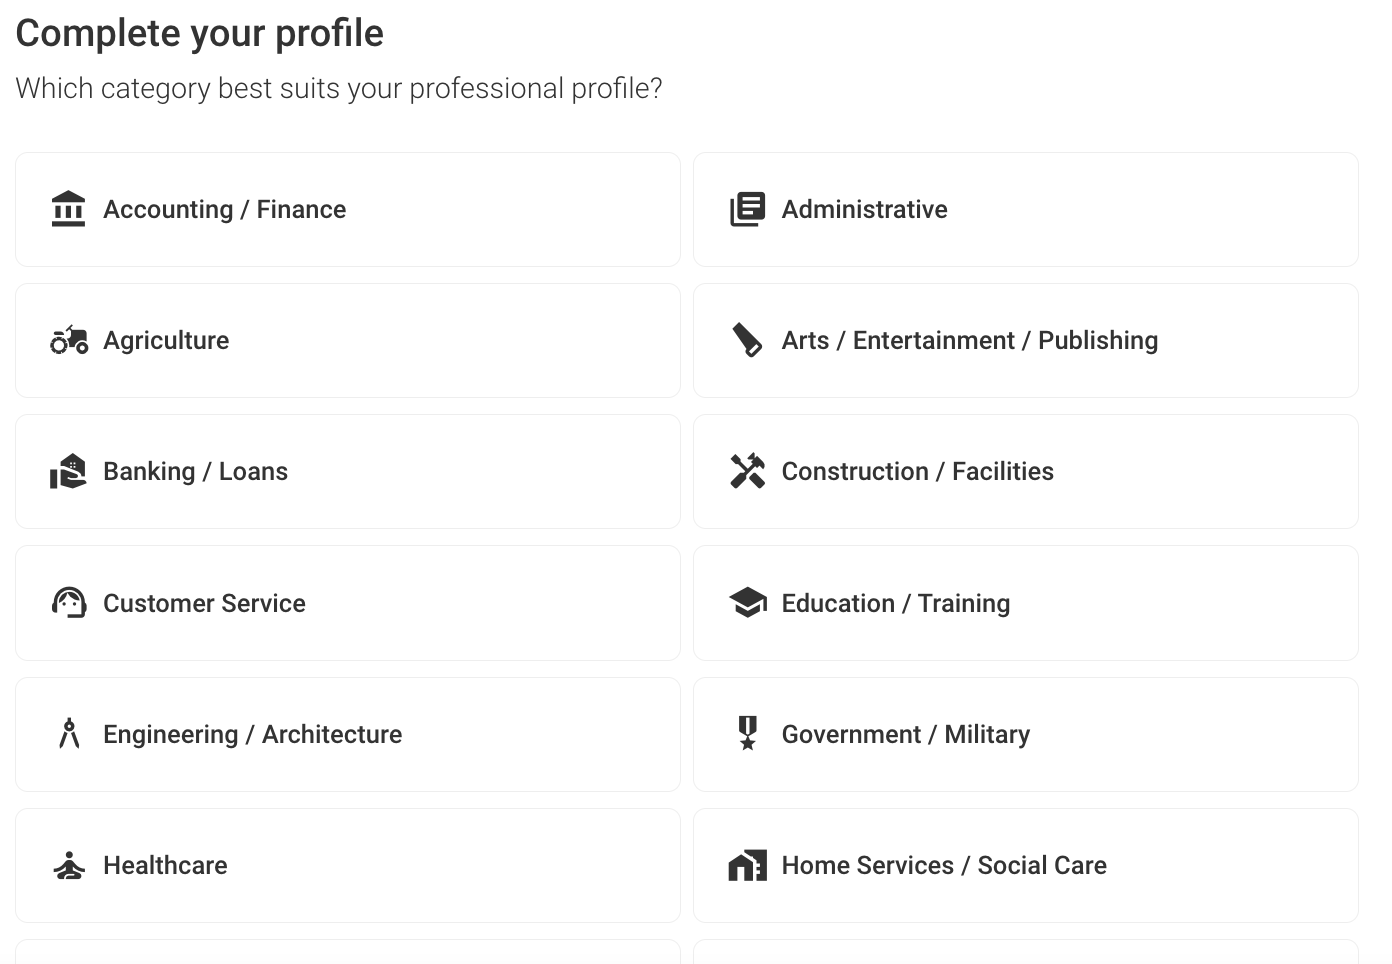 Complete your profile

Which category best suits your professional profile?

2)

Accounting / Finance

S% Agriculture

nD Banking / Loans

7) Customer Service

A Engineering / Architecture

A Healthcare

B8 Administrative

AY Arts / Entertainment / Publishing

A Construction / Facilities

® Education / Training

9 Government / Military

AY Home Services / Social Care